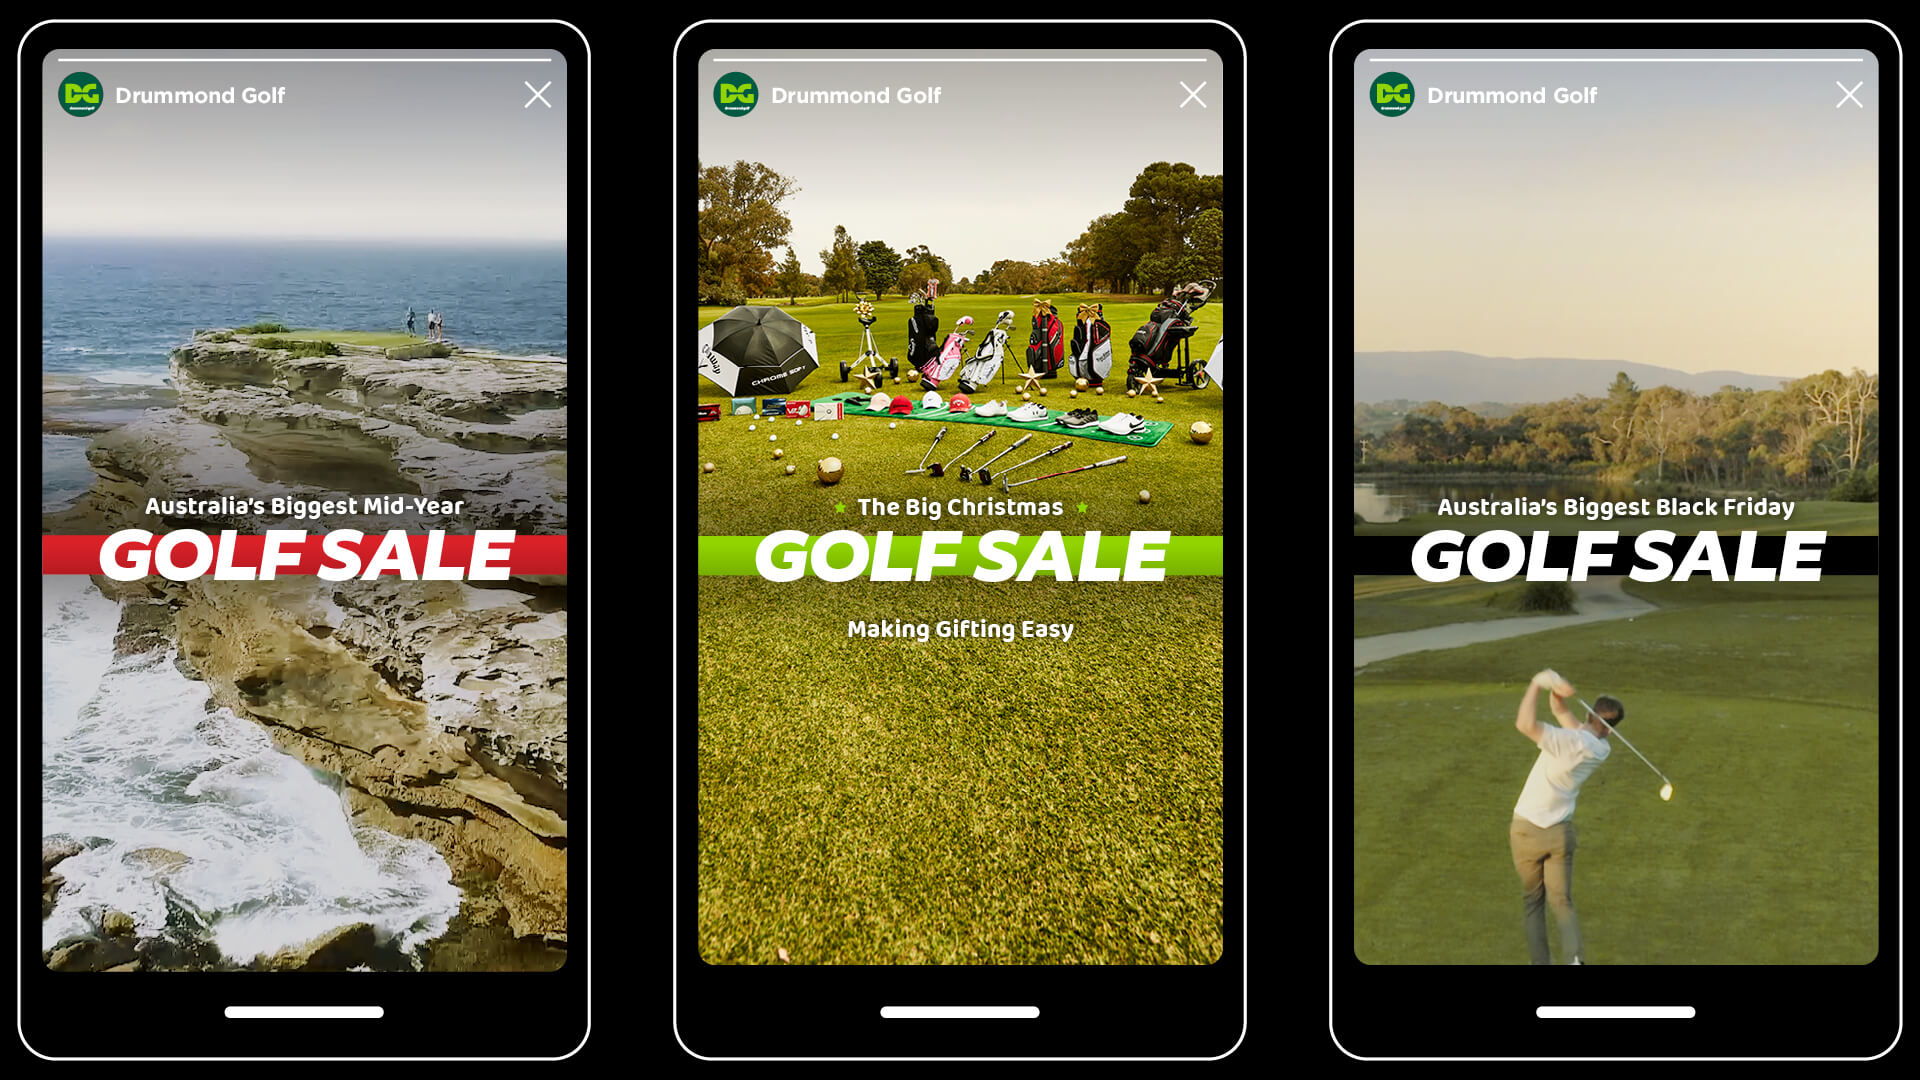 Drummond Golf social media posts for the Black Friday Christmas sale